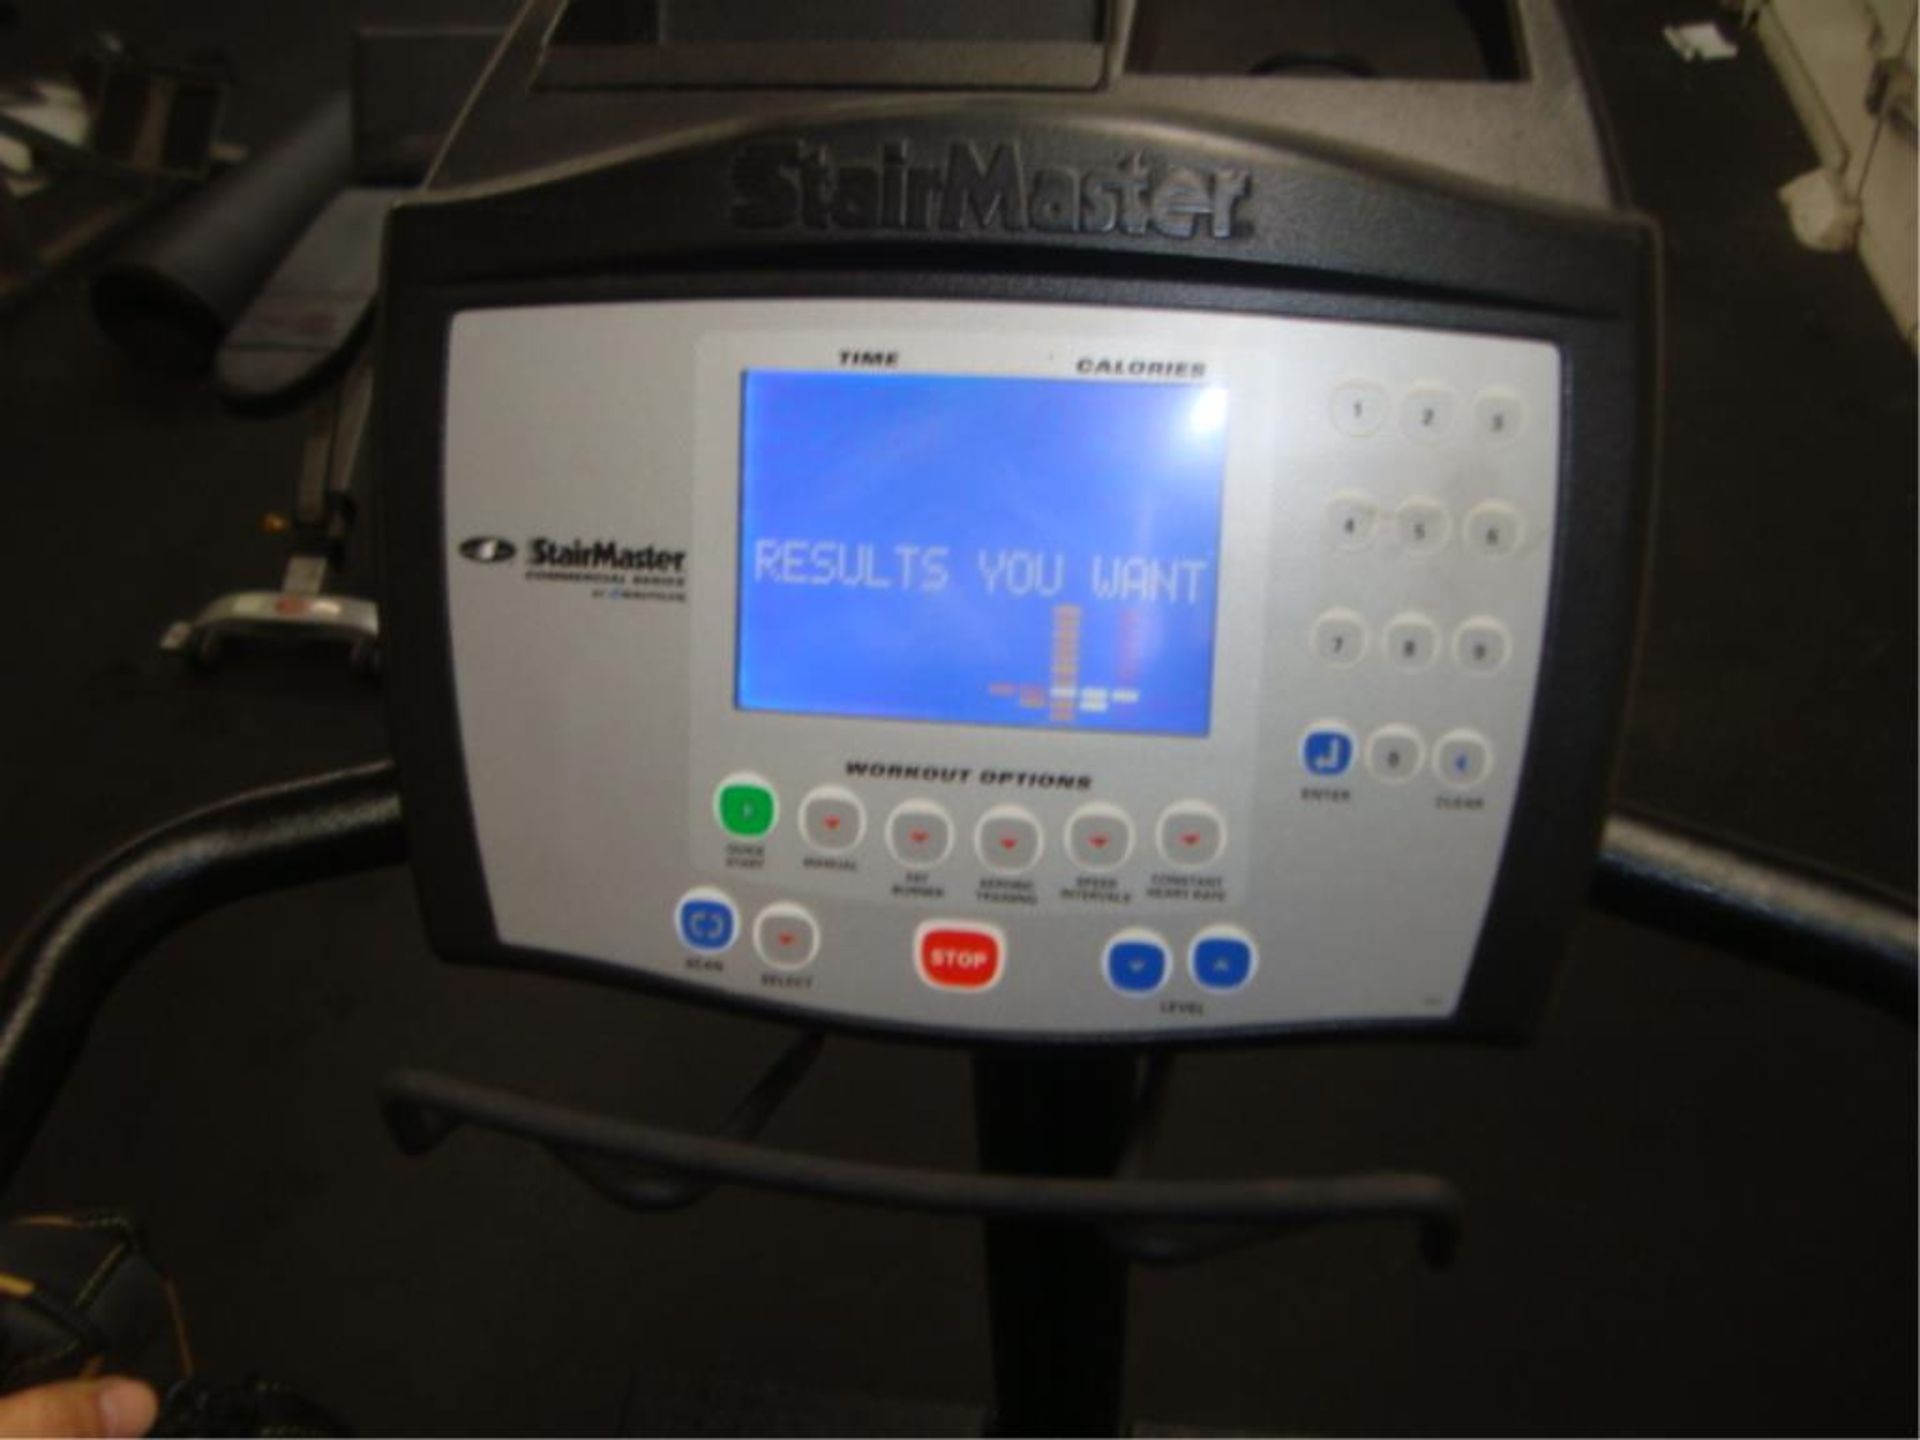 Commercial Series Stair Master Machine - Image 7 of 7